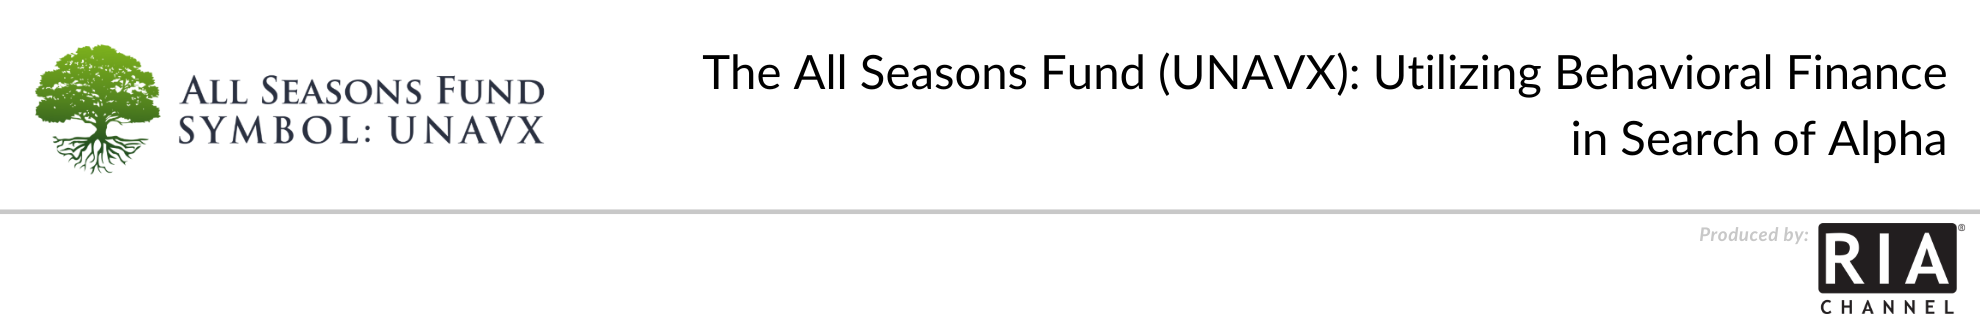 The All Seasons Fund (UNAVX): Utilizing Behavioral Finance in Search of Alpha